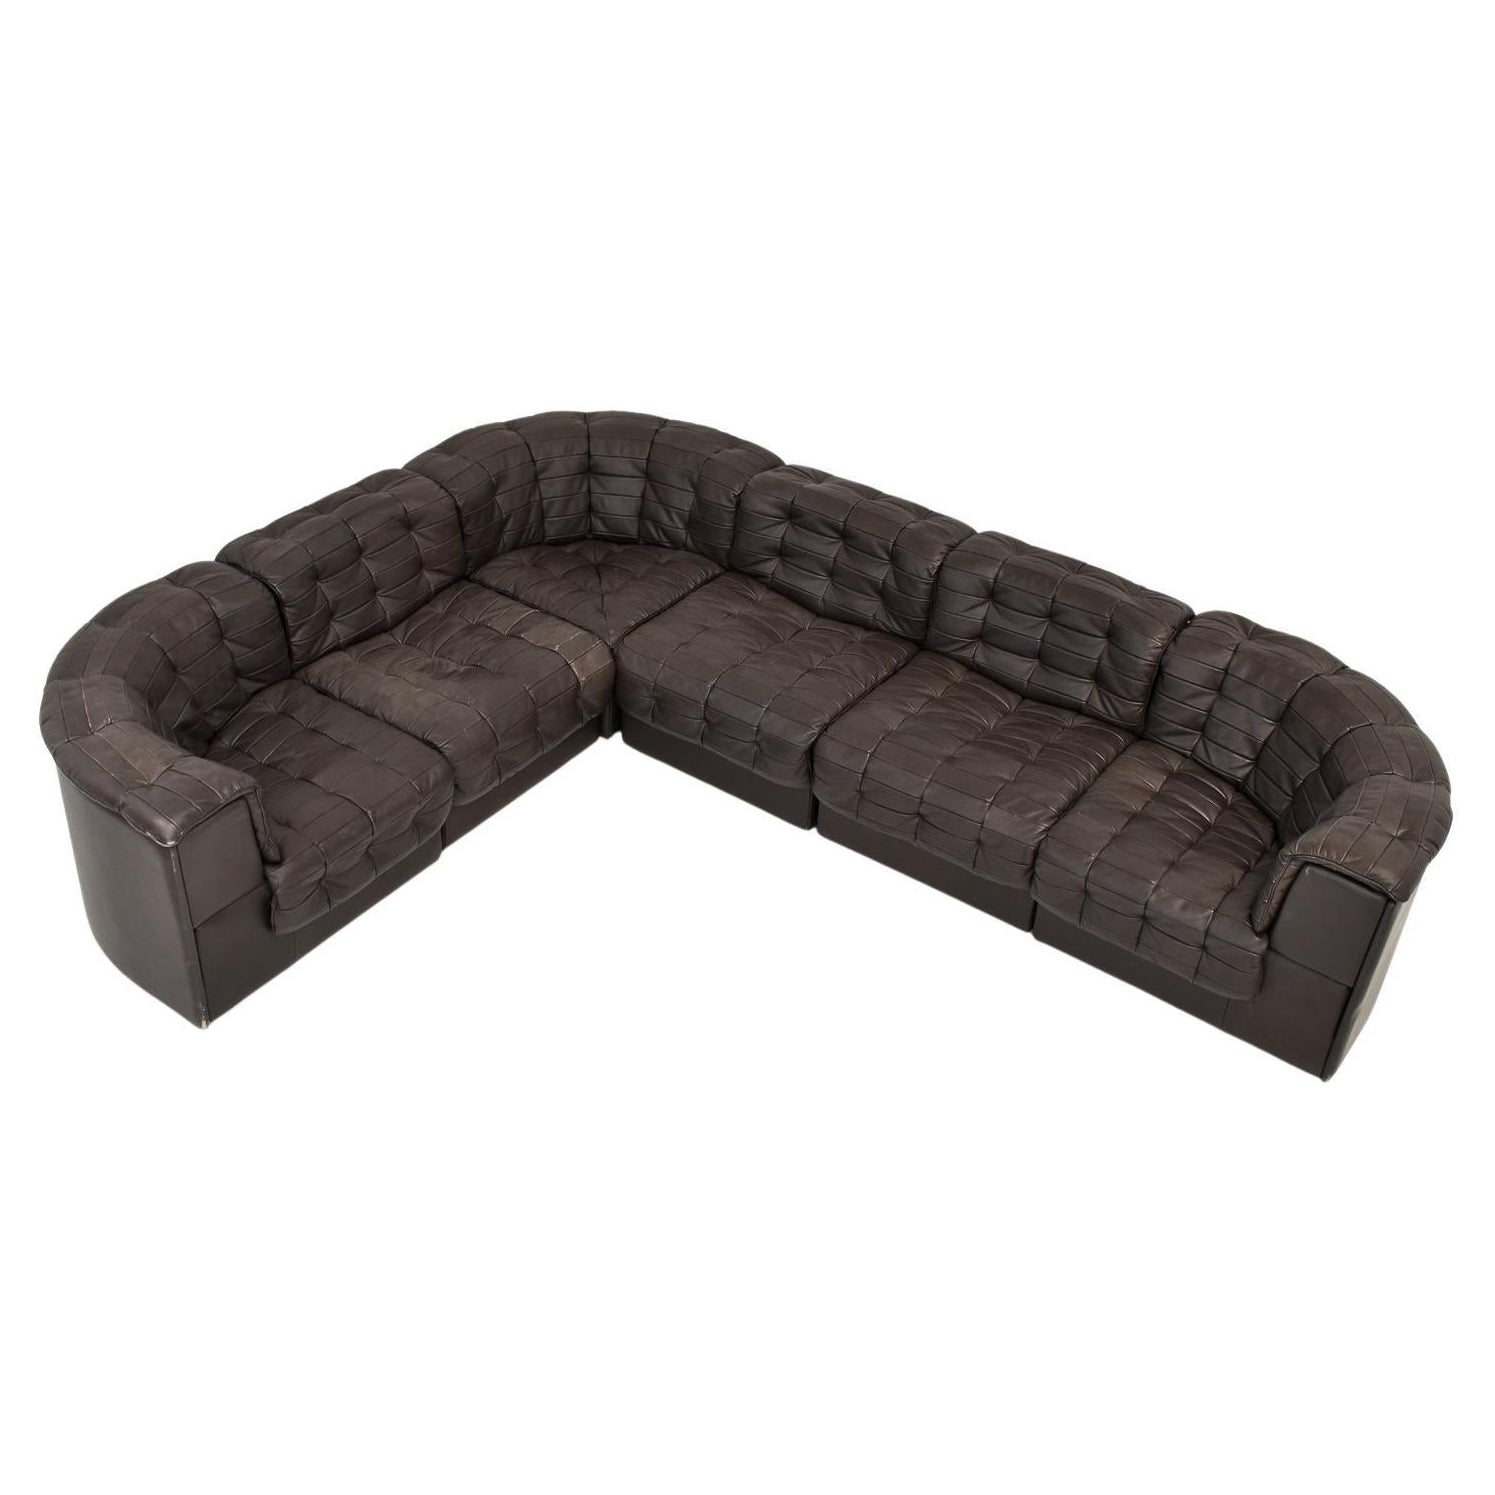 Modular Patchwork Leather Sofa by De Sede, Model 'DS11'